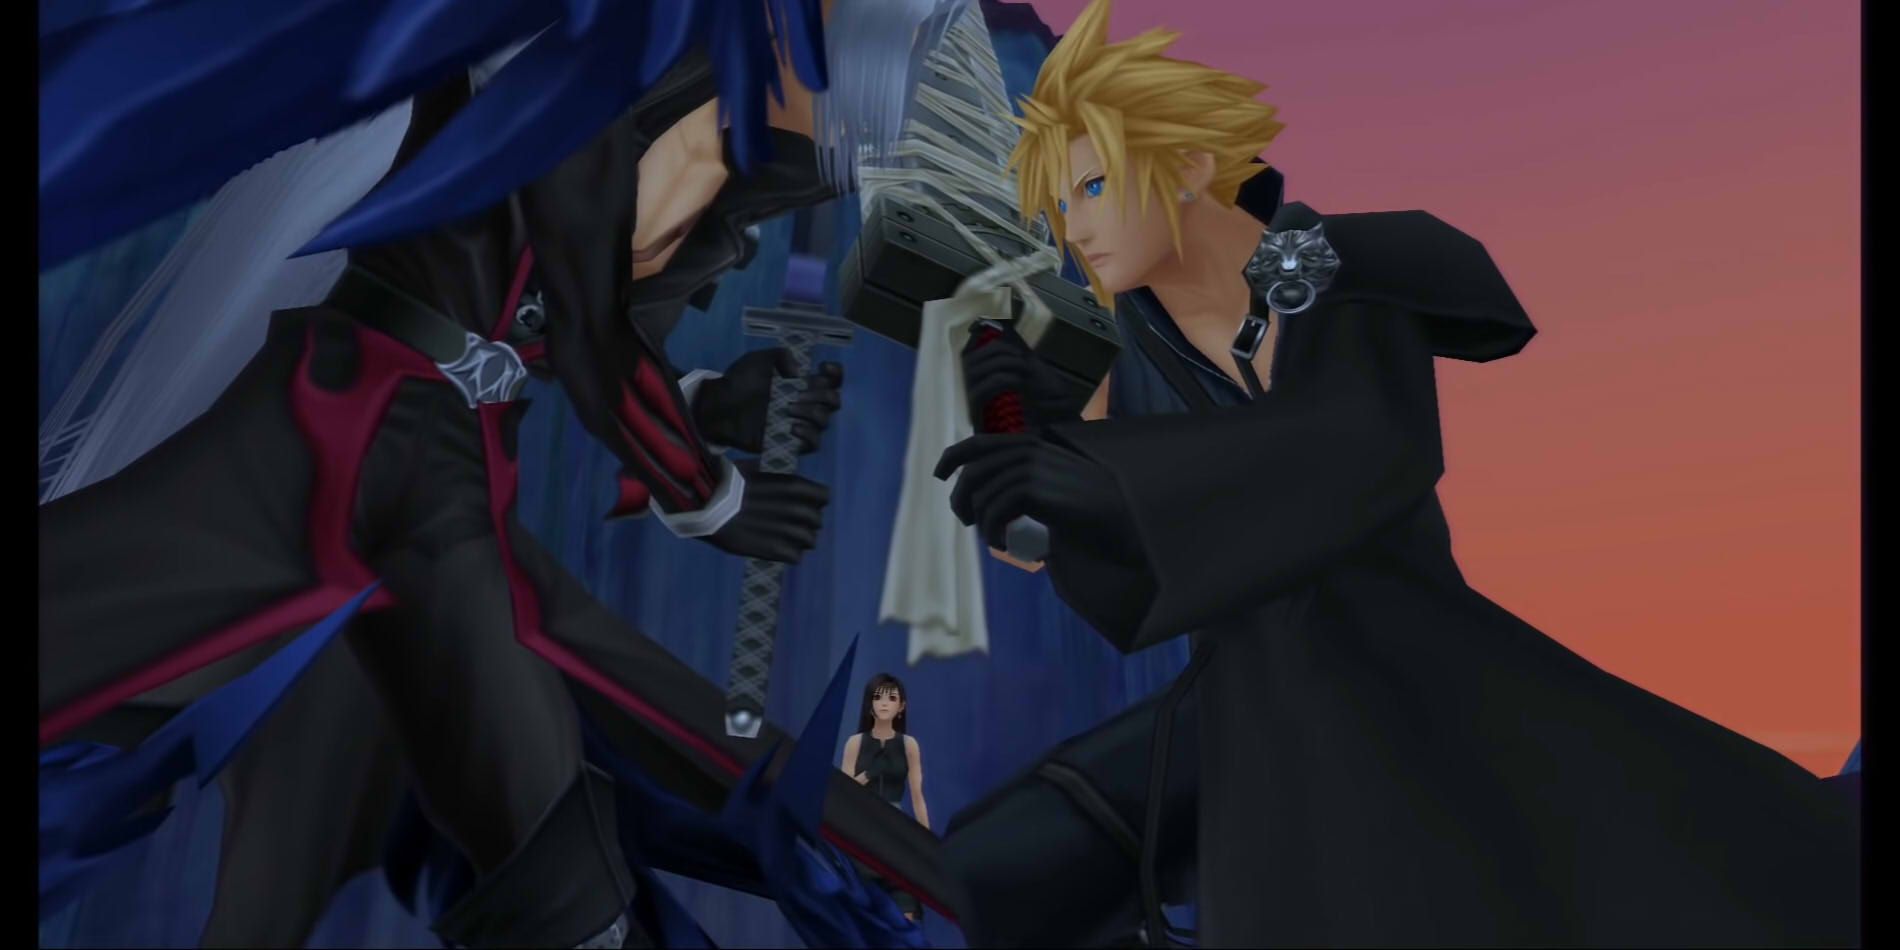 Cloud and Sephiroth battle while Tifa cheers Cloud to defeat his demons